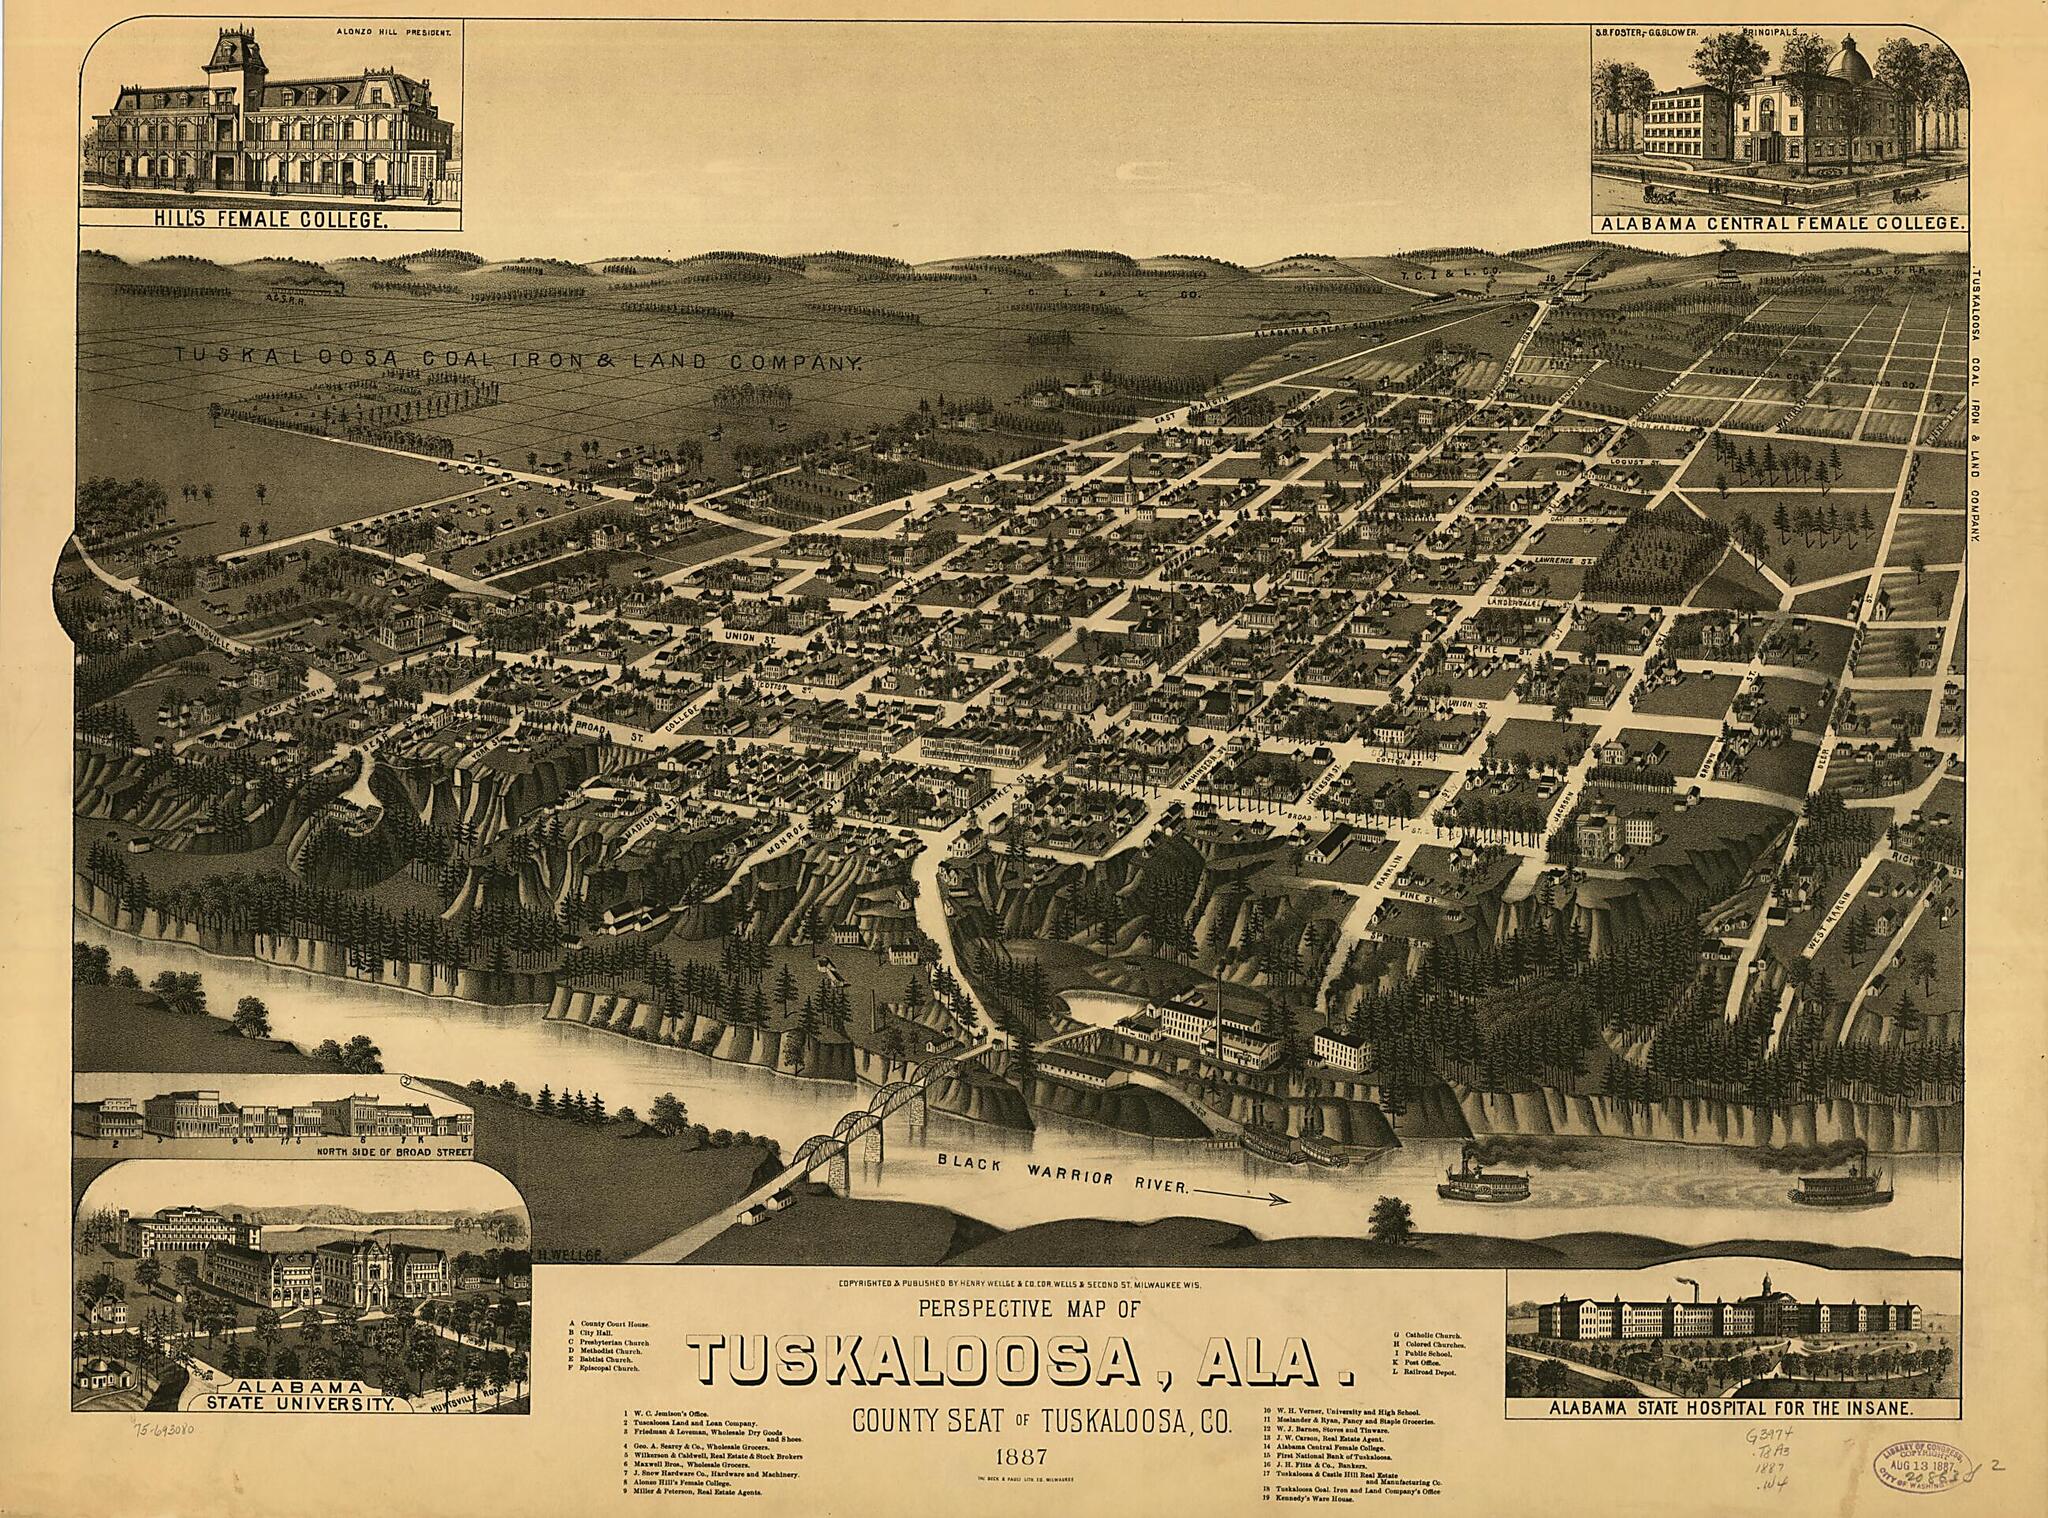 This old map of Perspective Map of Tuskaloosa,Alabama County Seat of Tuskaloosa, County from 1887 was created by  Beck &amp; Pauli,  Henry Wellge &amp; Co, H. (Henry) Wellge in 1887